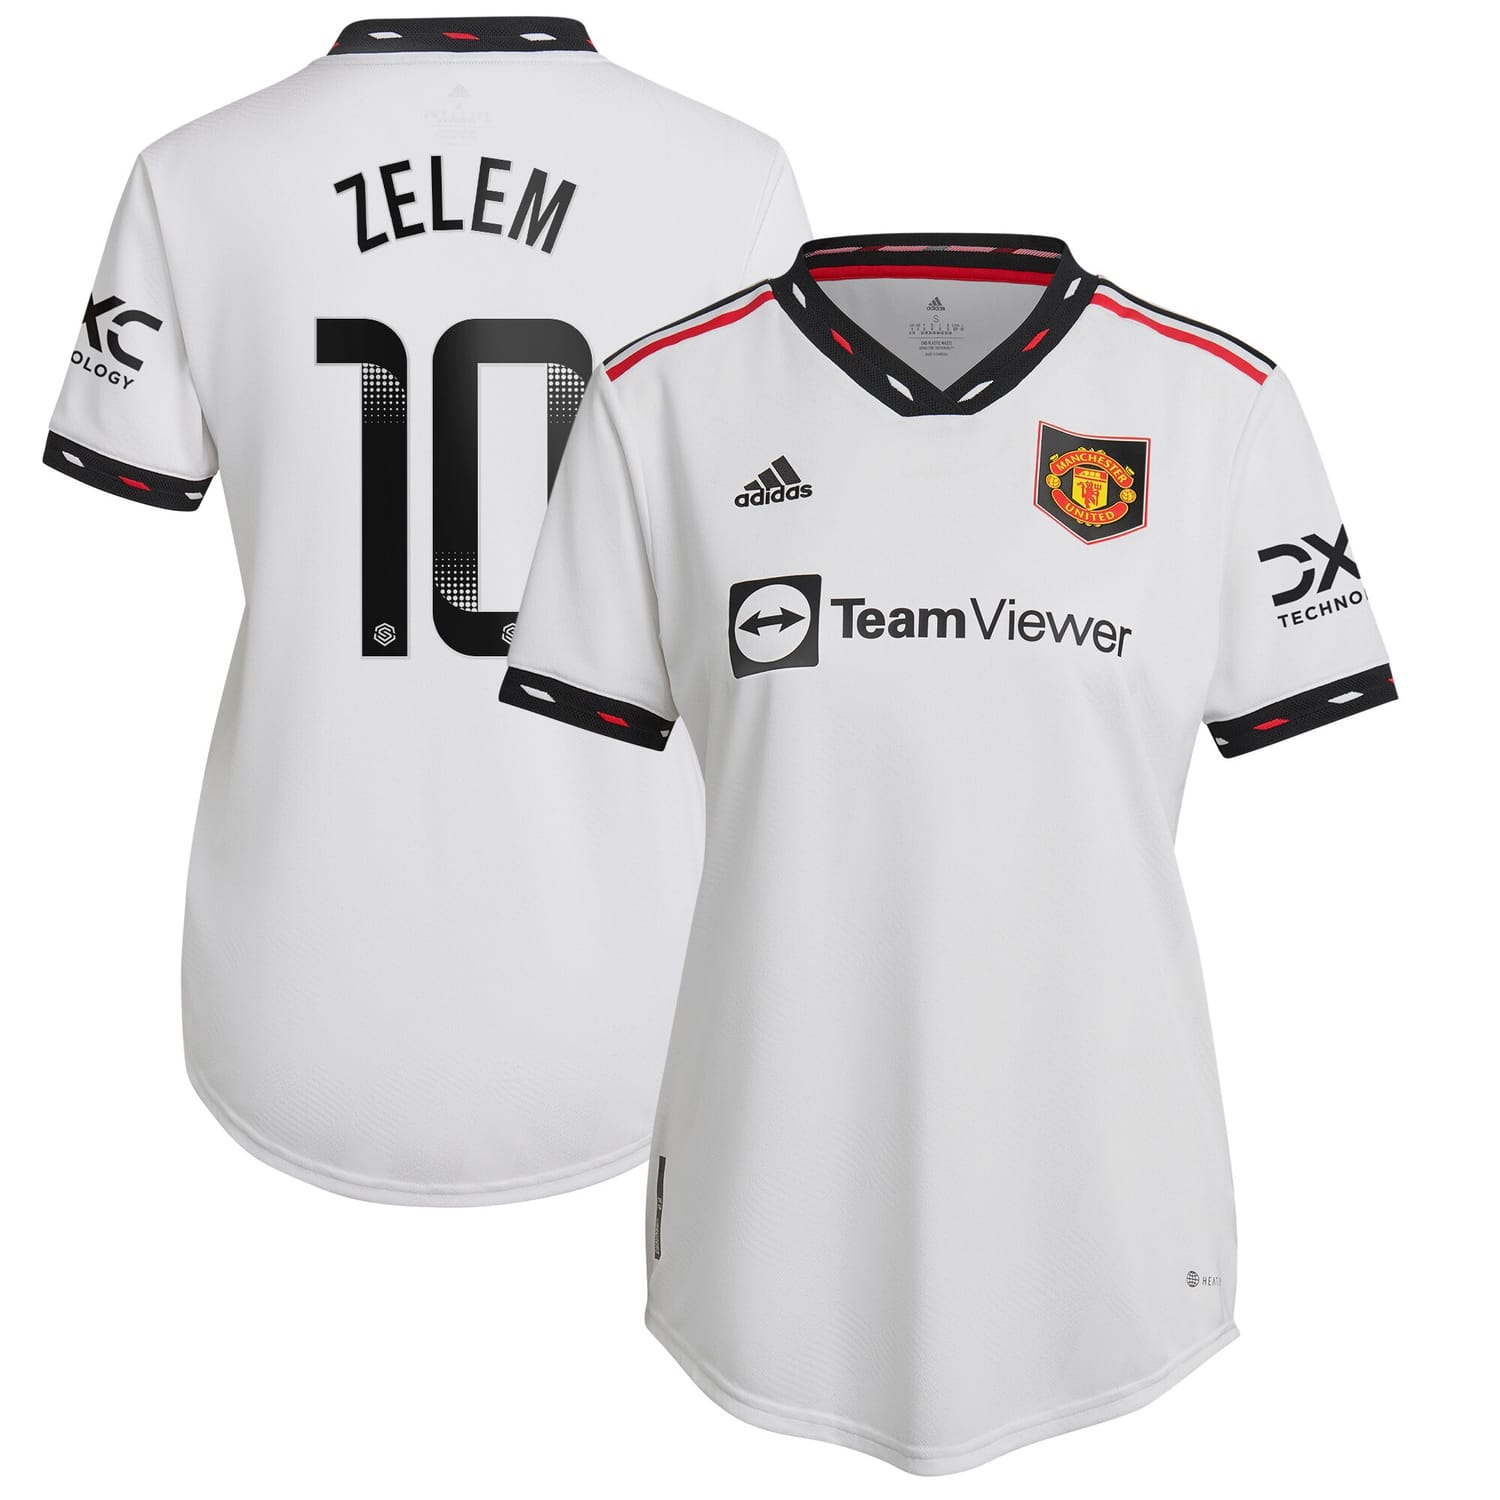 Premier League Manchester United Away WSL Authentic Jersey Shirt 2022-23 player Katie Zelem 10 printing for Women